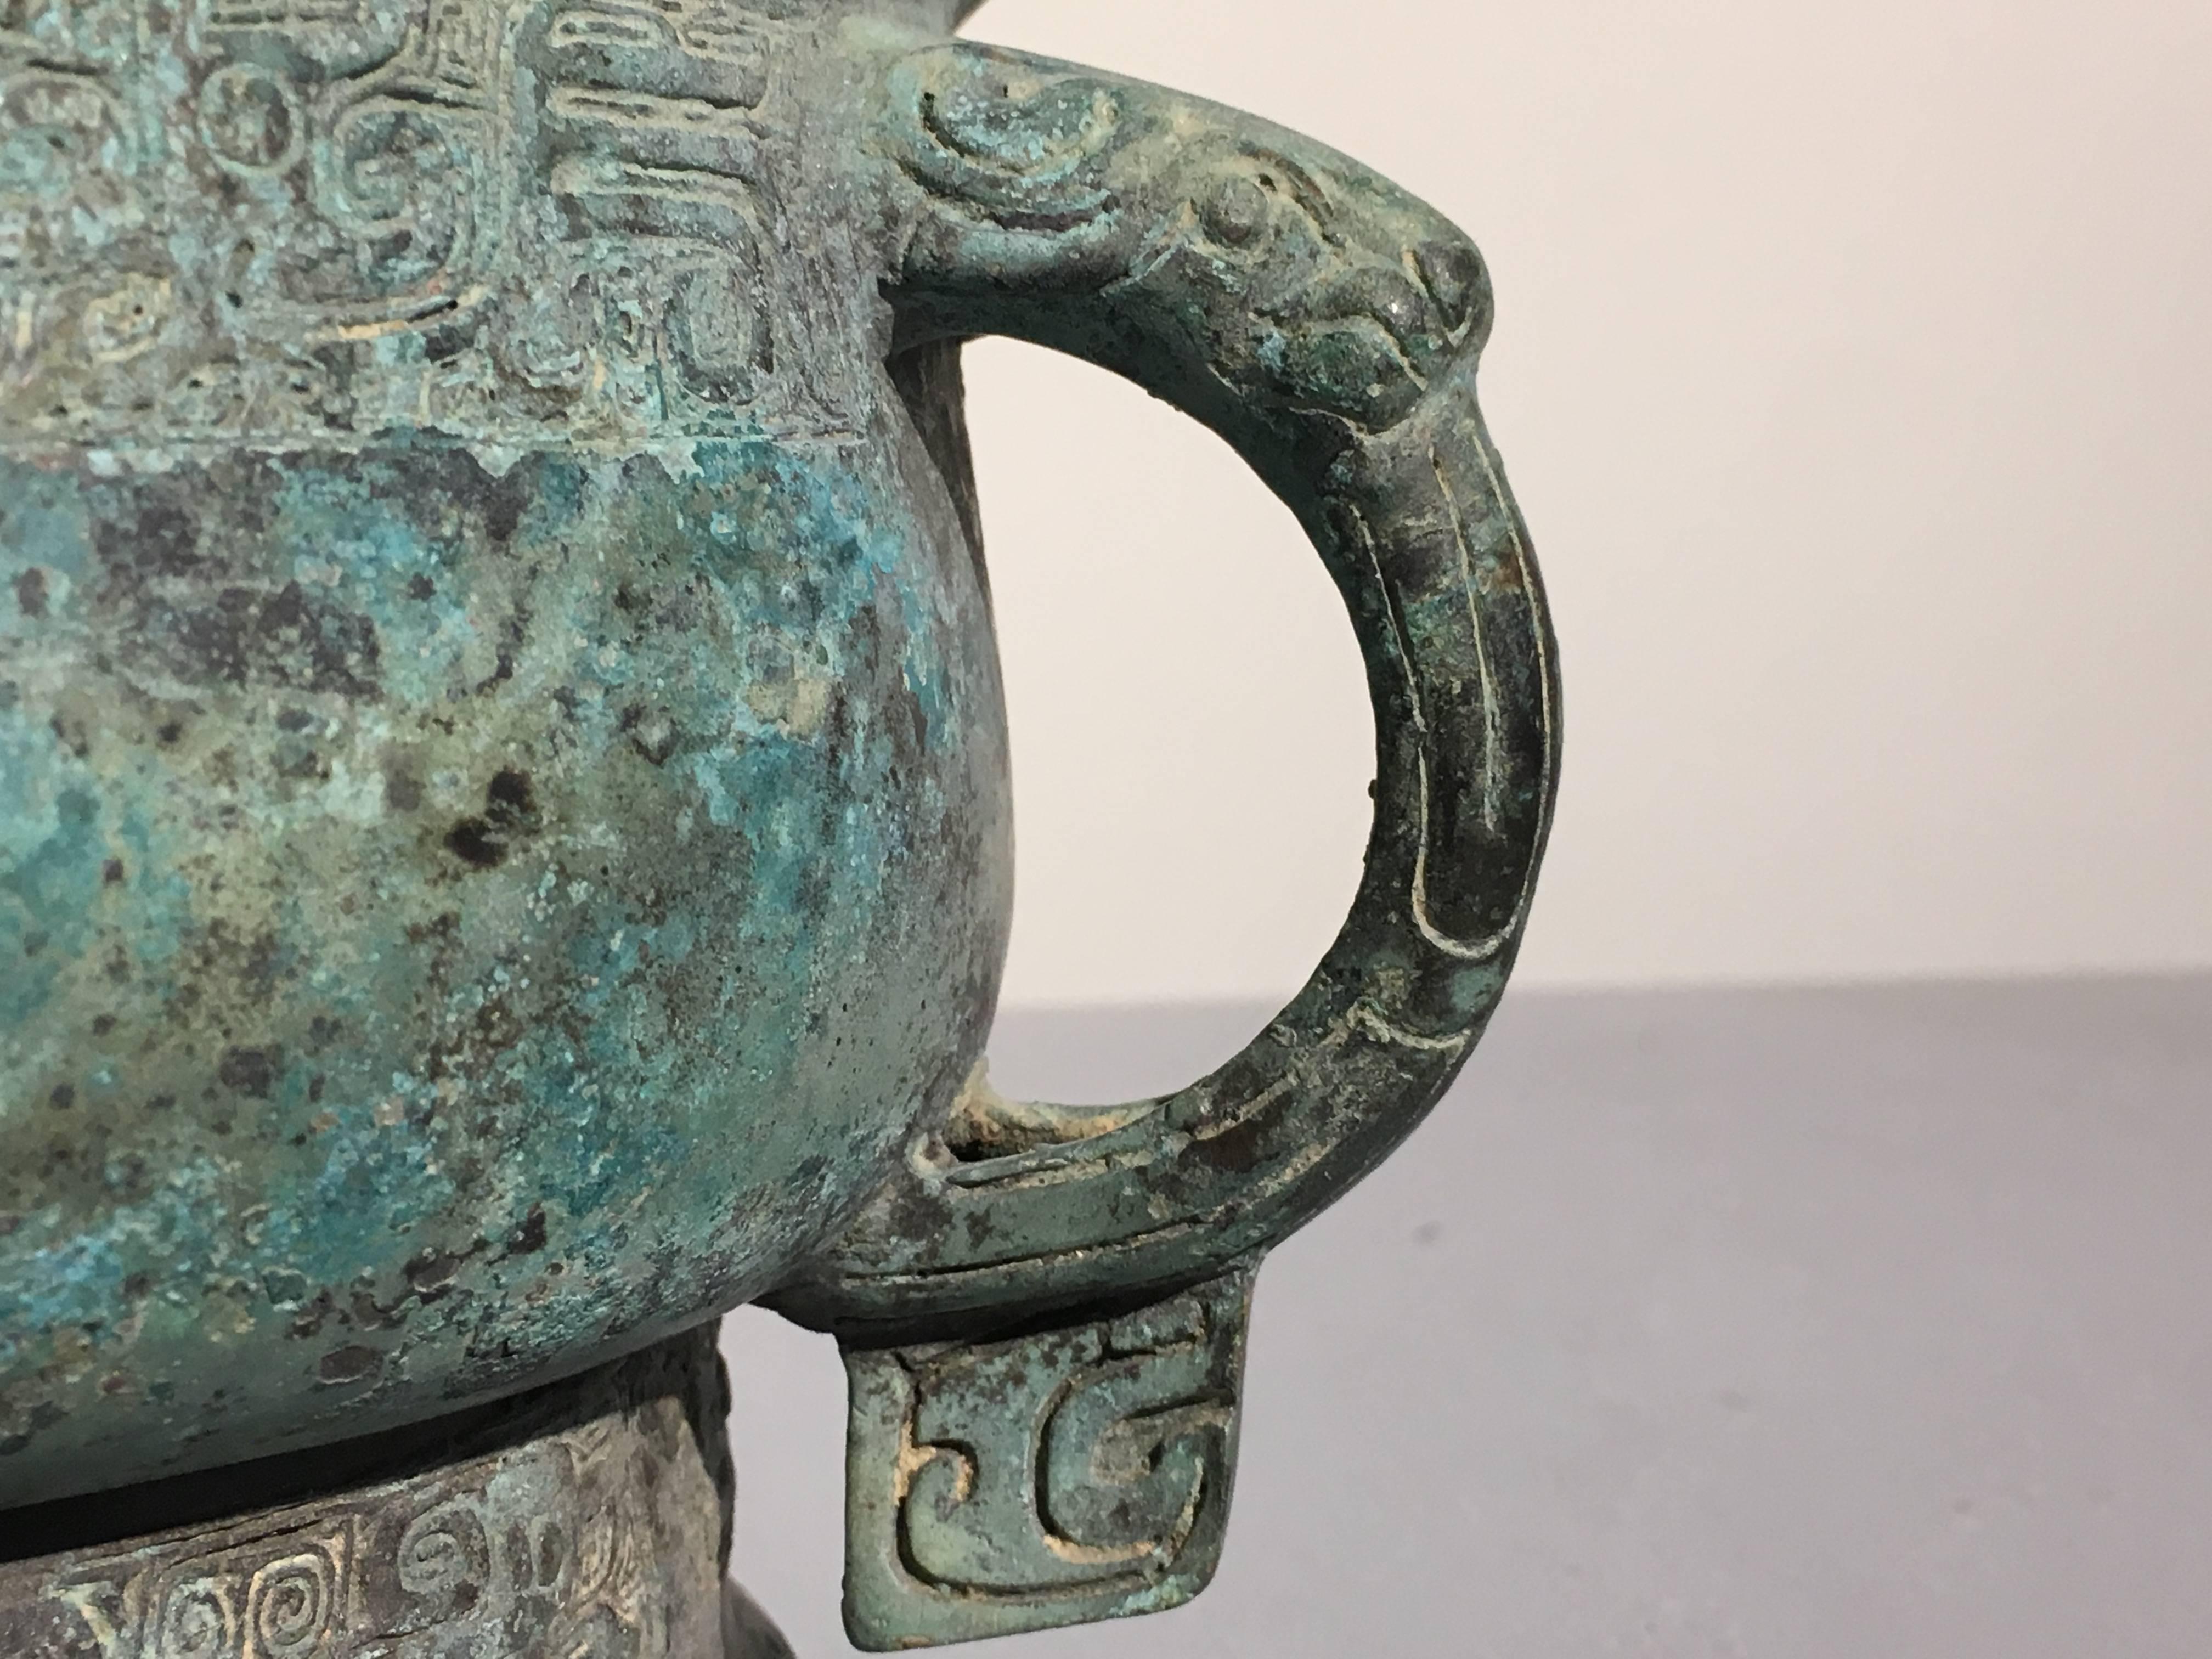 Archaic Chinese Bronze Ritual Vessel, Gui, Early Western Zhou, 11th century BCE For Sale 1